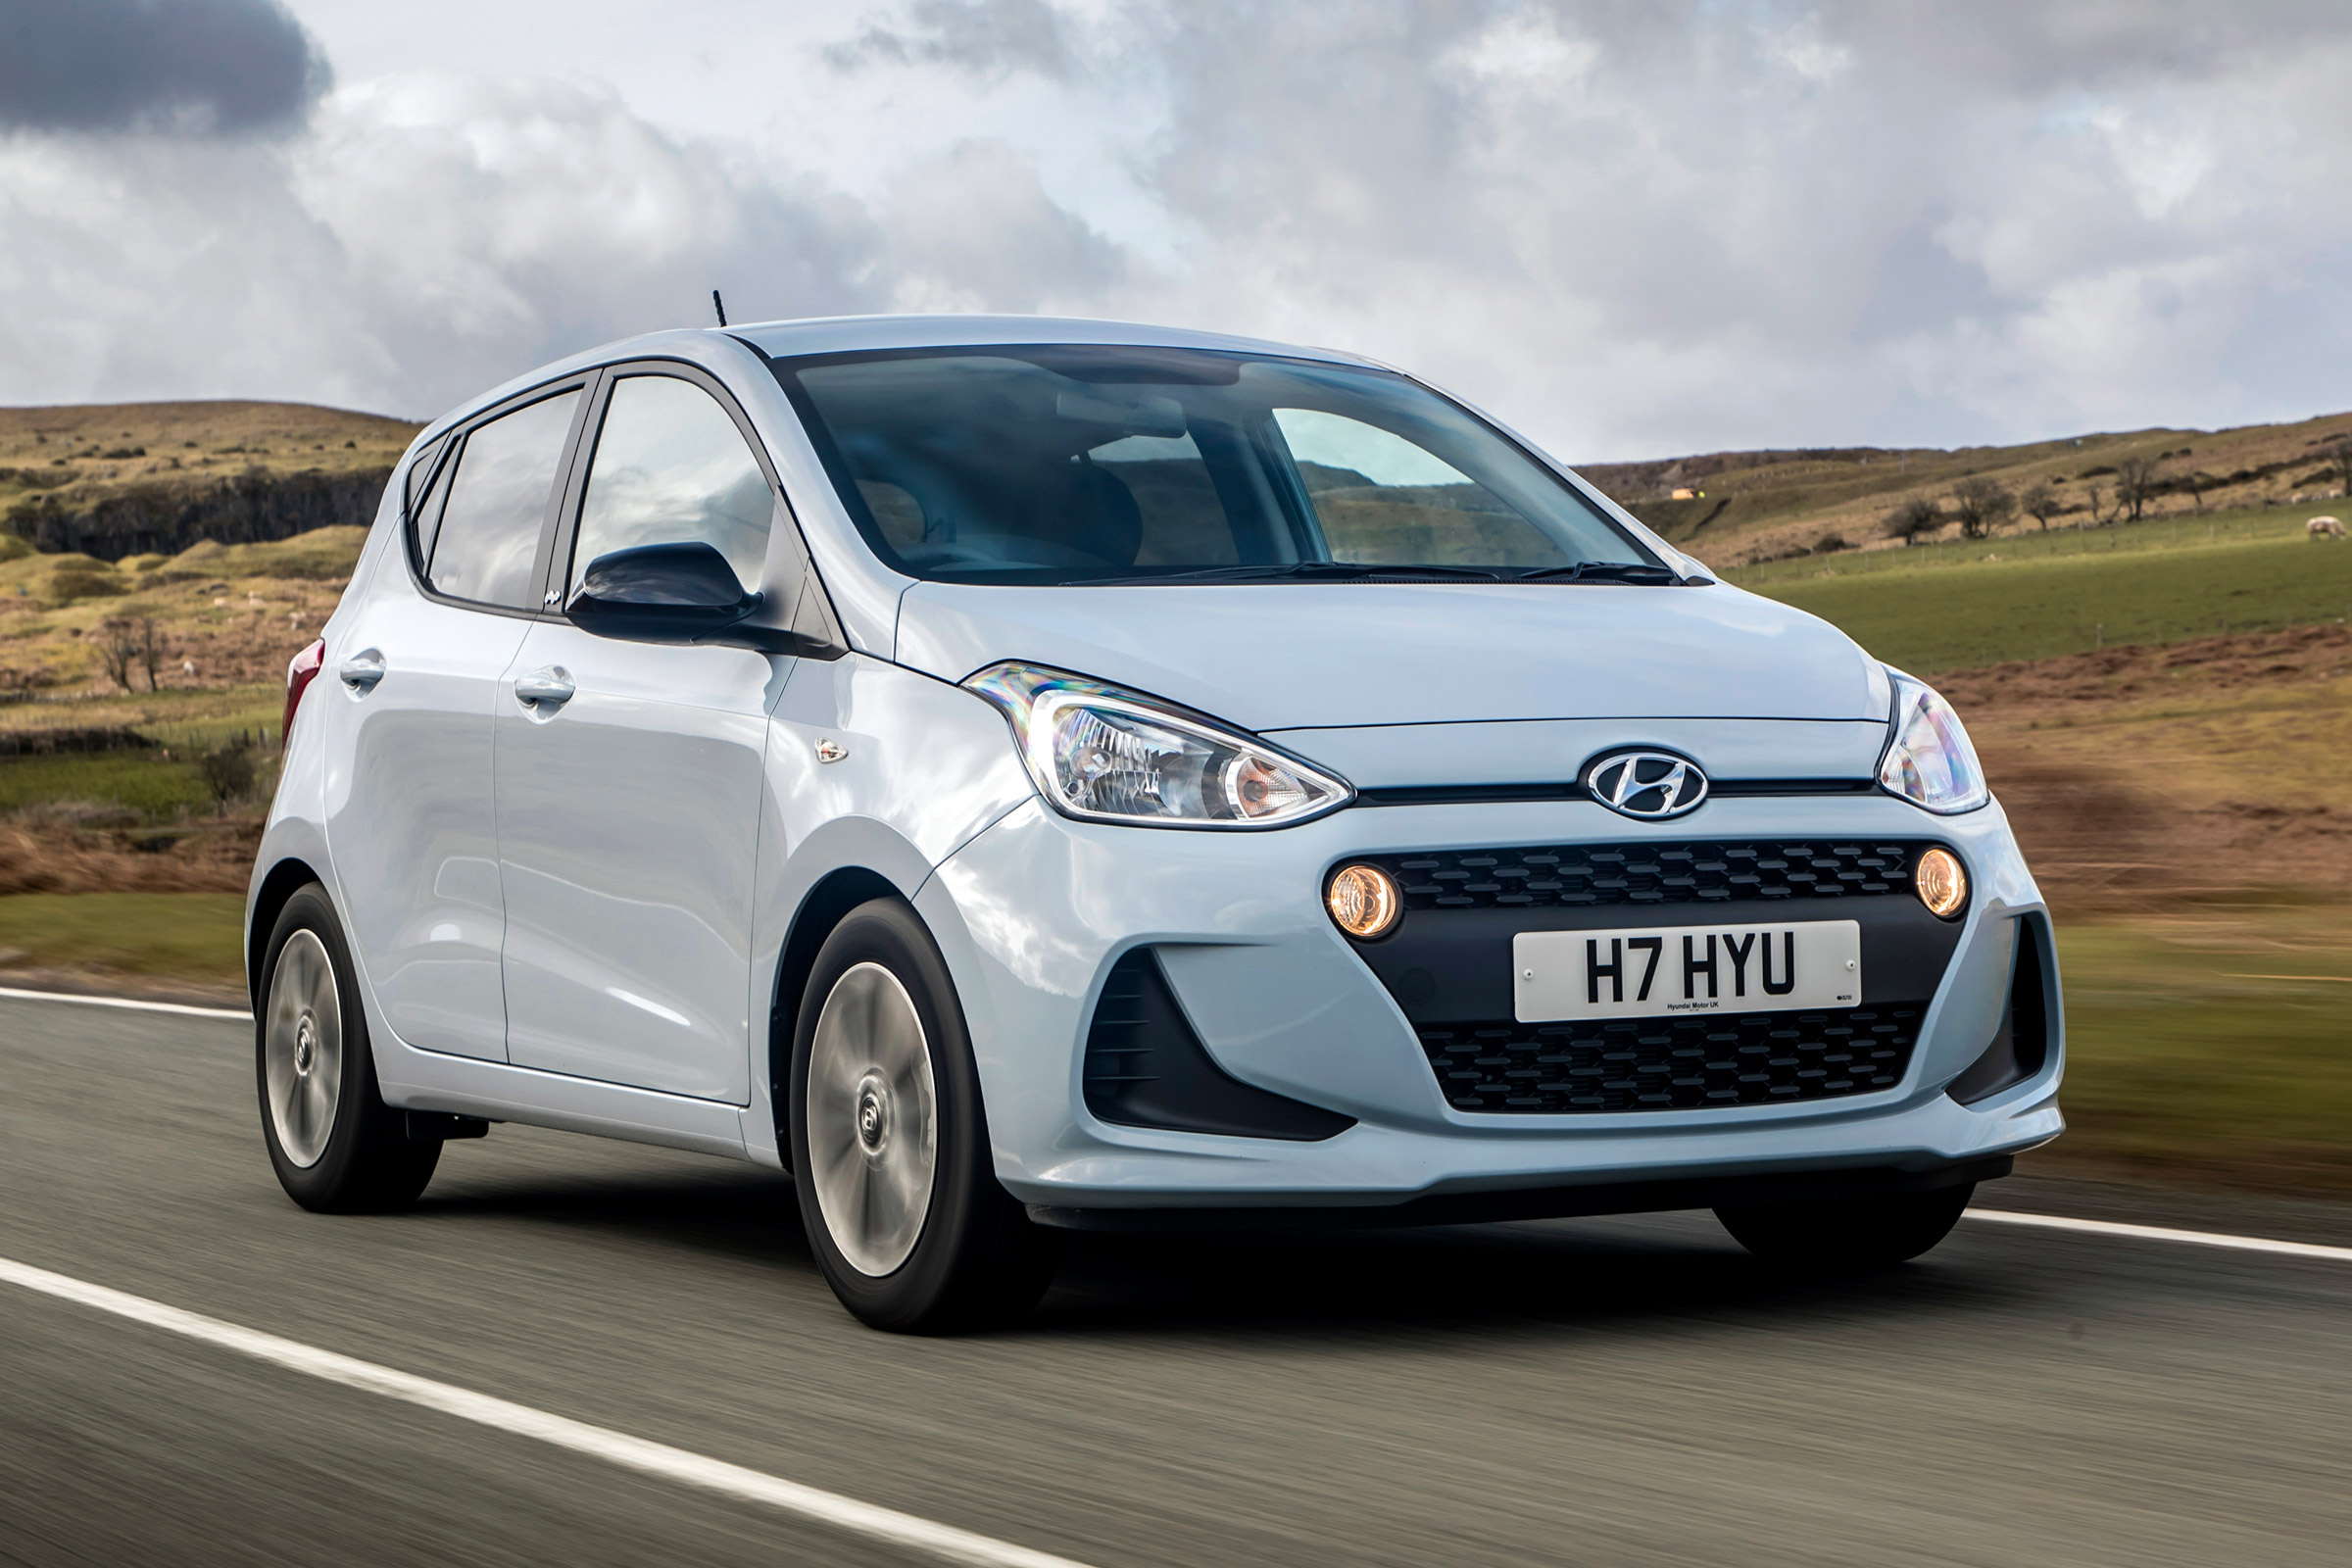 Hyundai i10 hatchback pictures Carbuyer